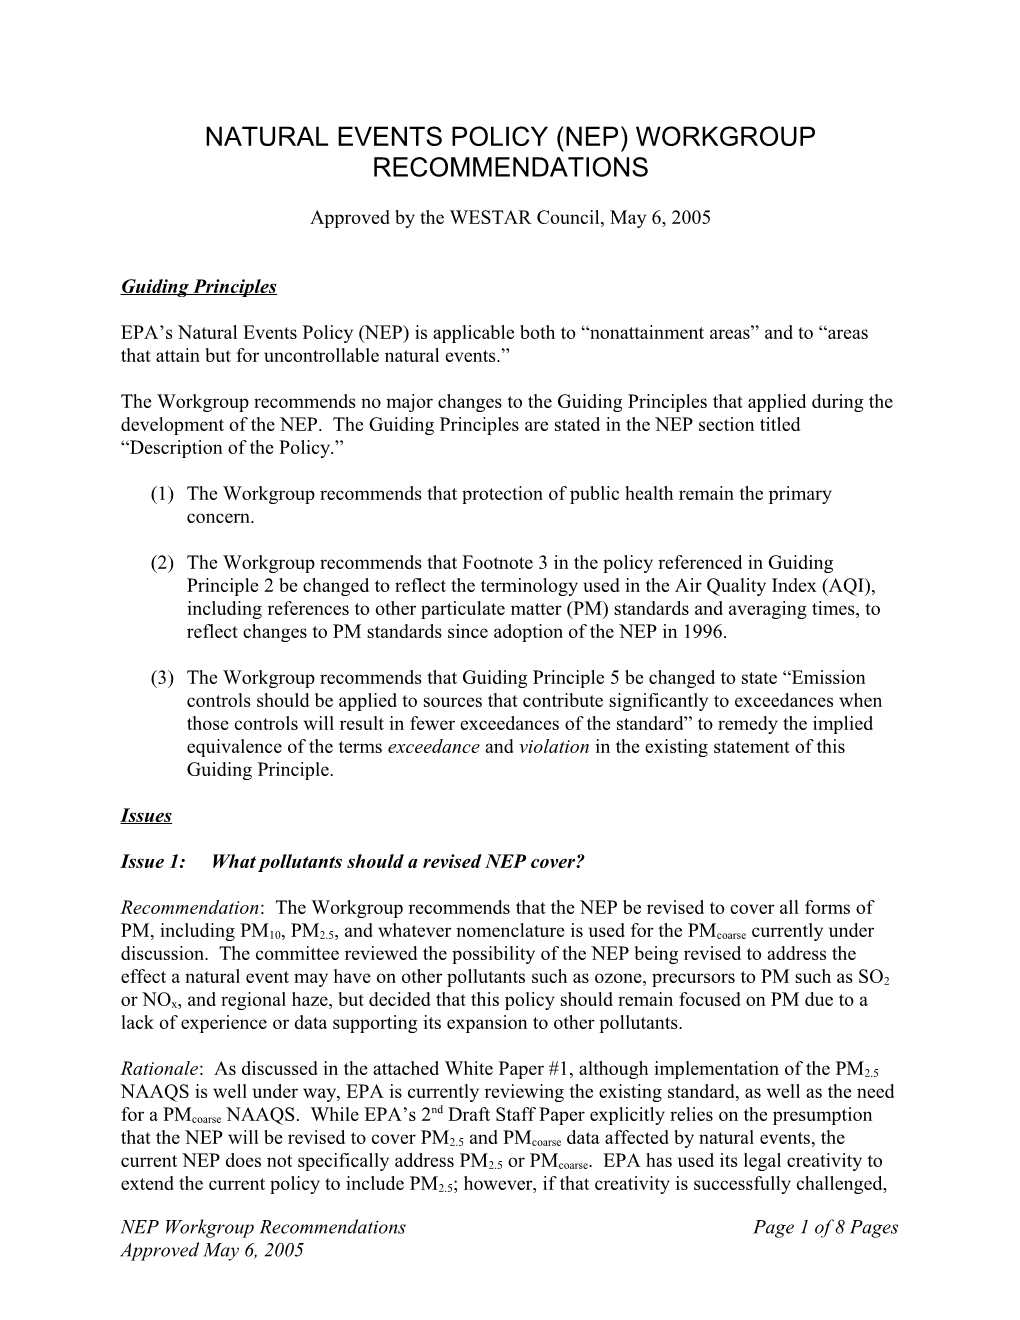 Nep Workgroup Recommendations